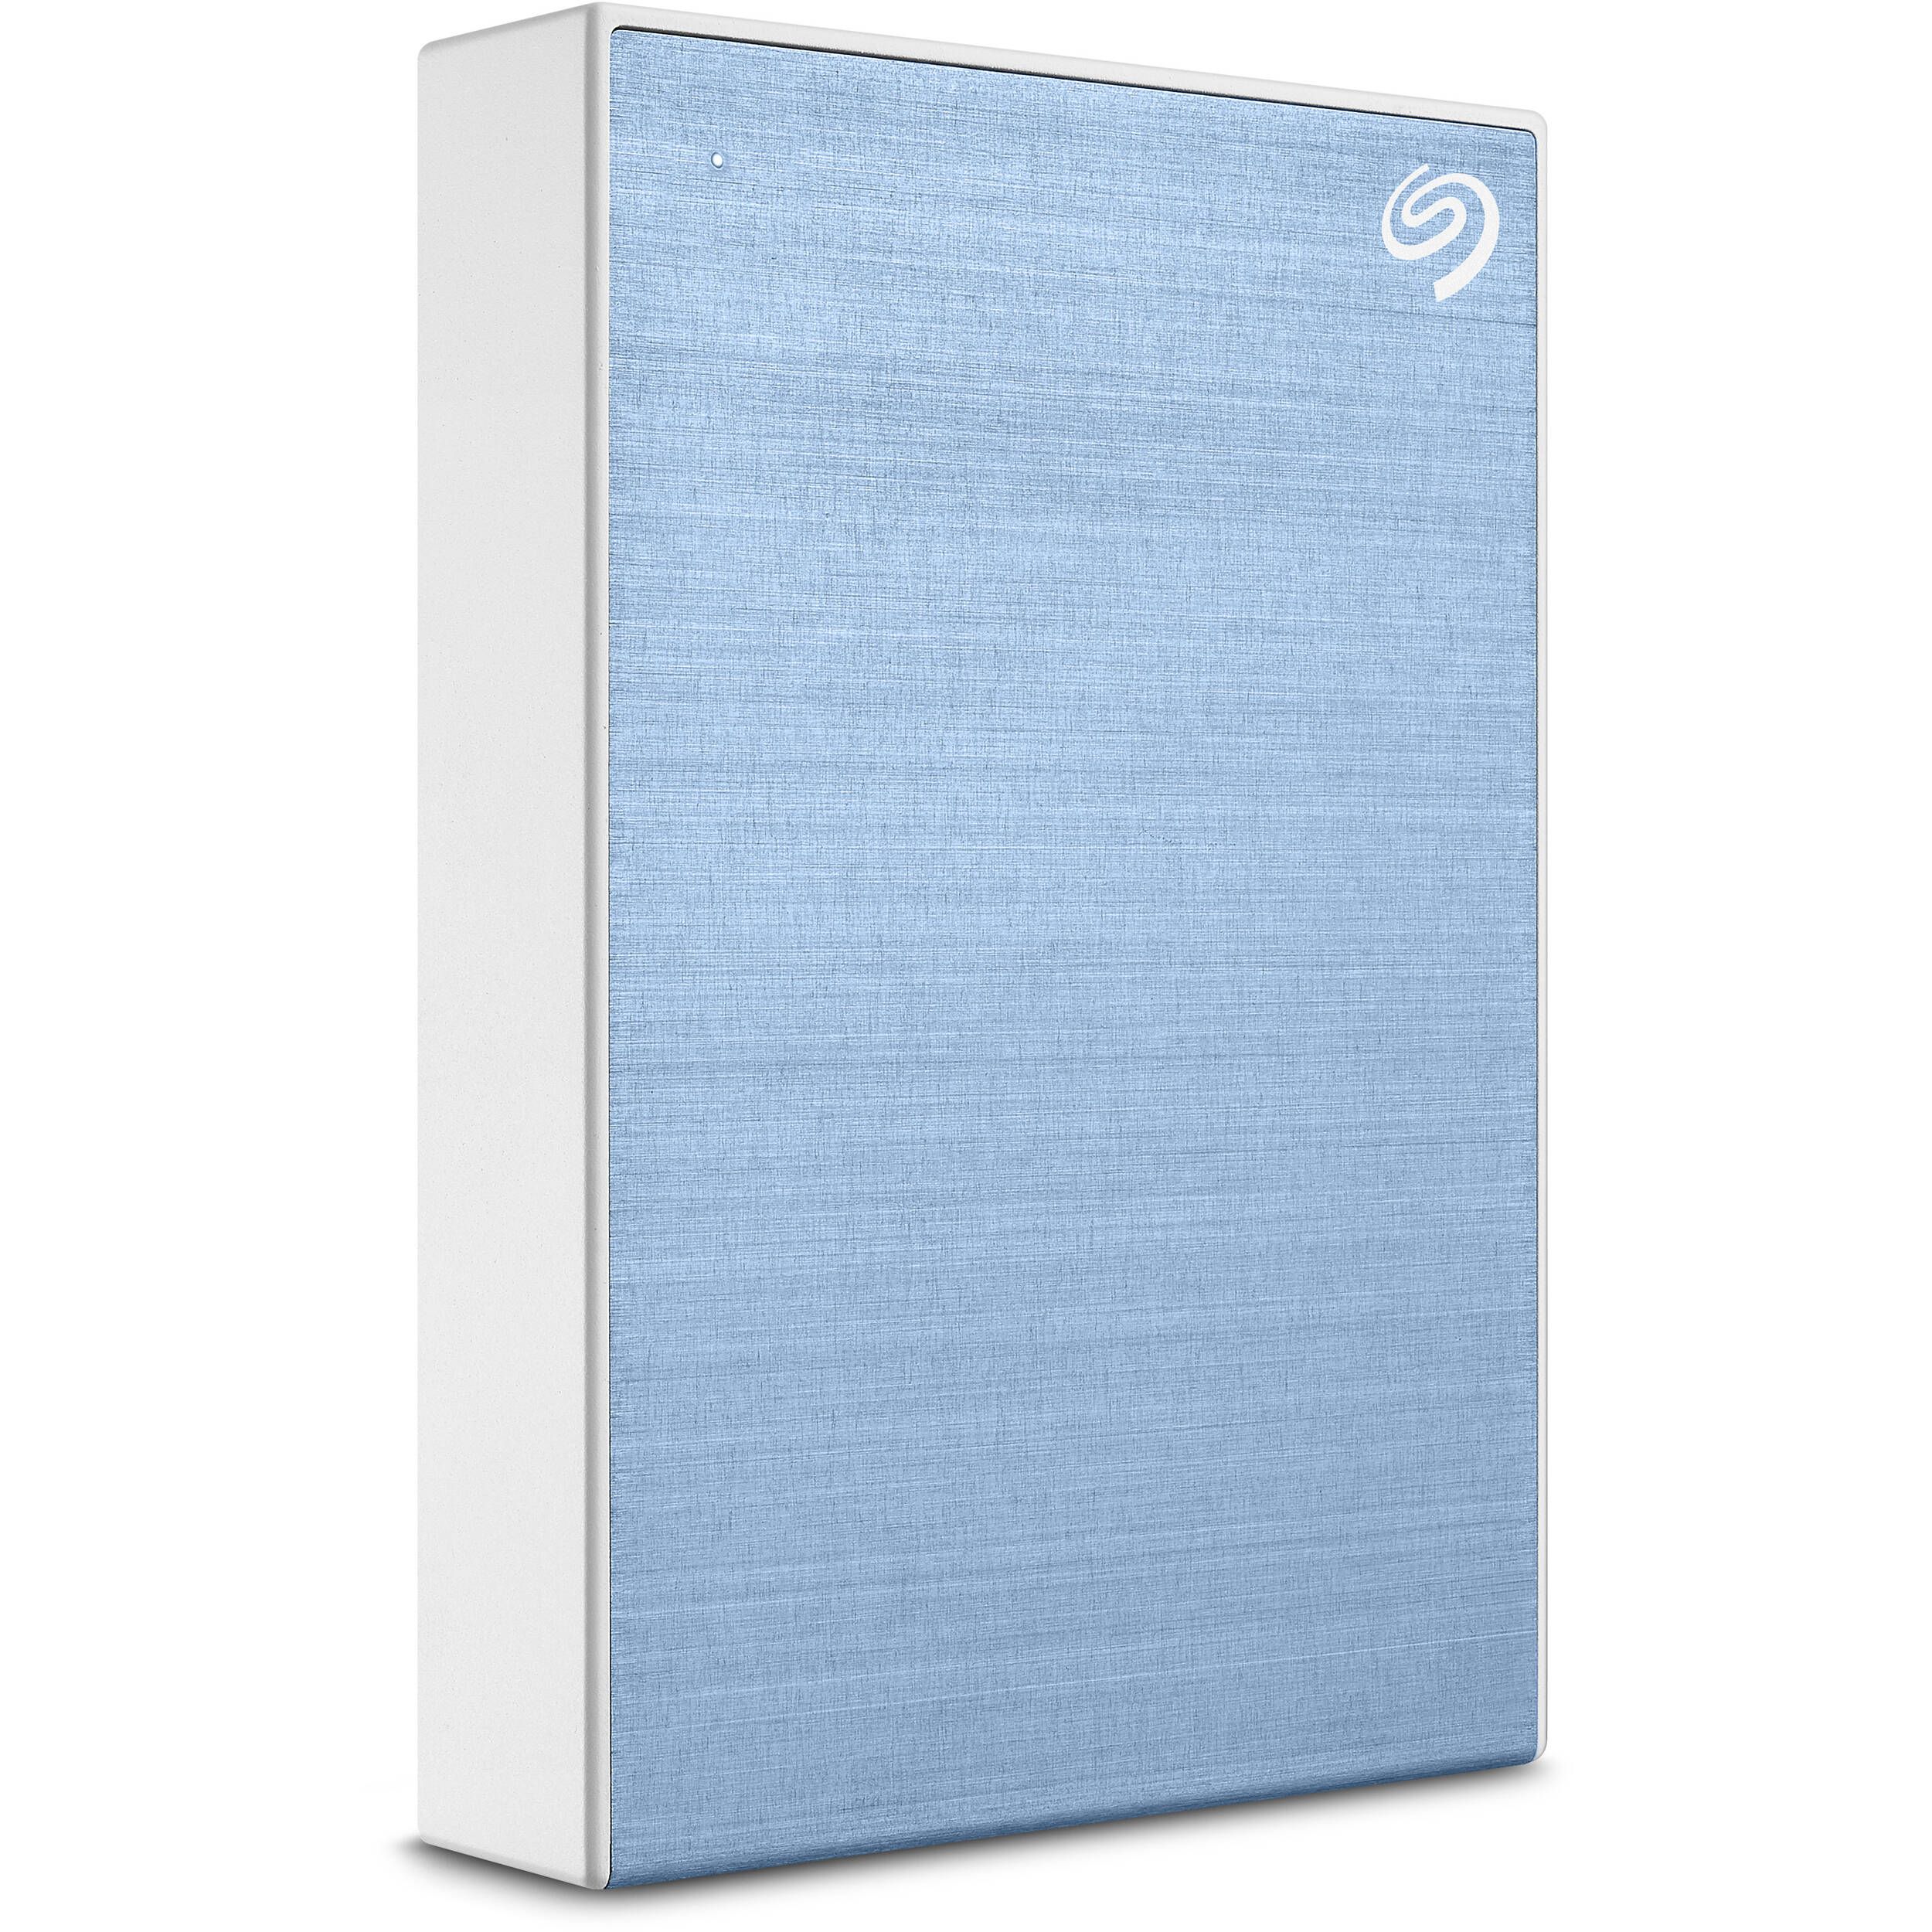 SEAGATE HDD External ONE TOUCH ( 2.5'/2TB/USB 3.0) Light Blue_1